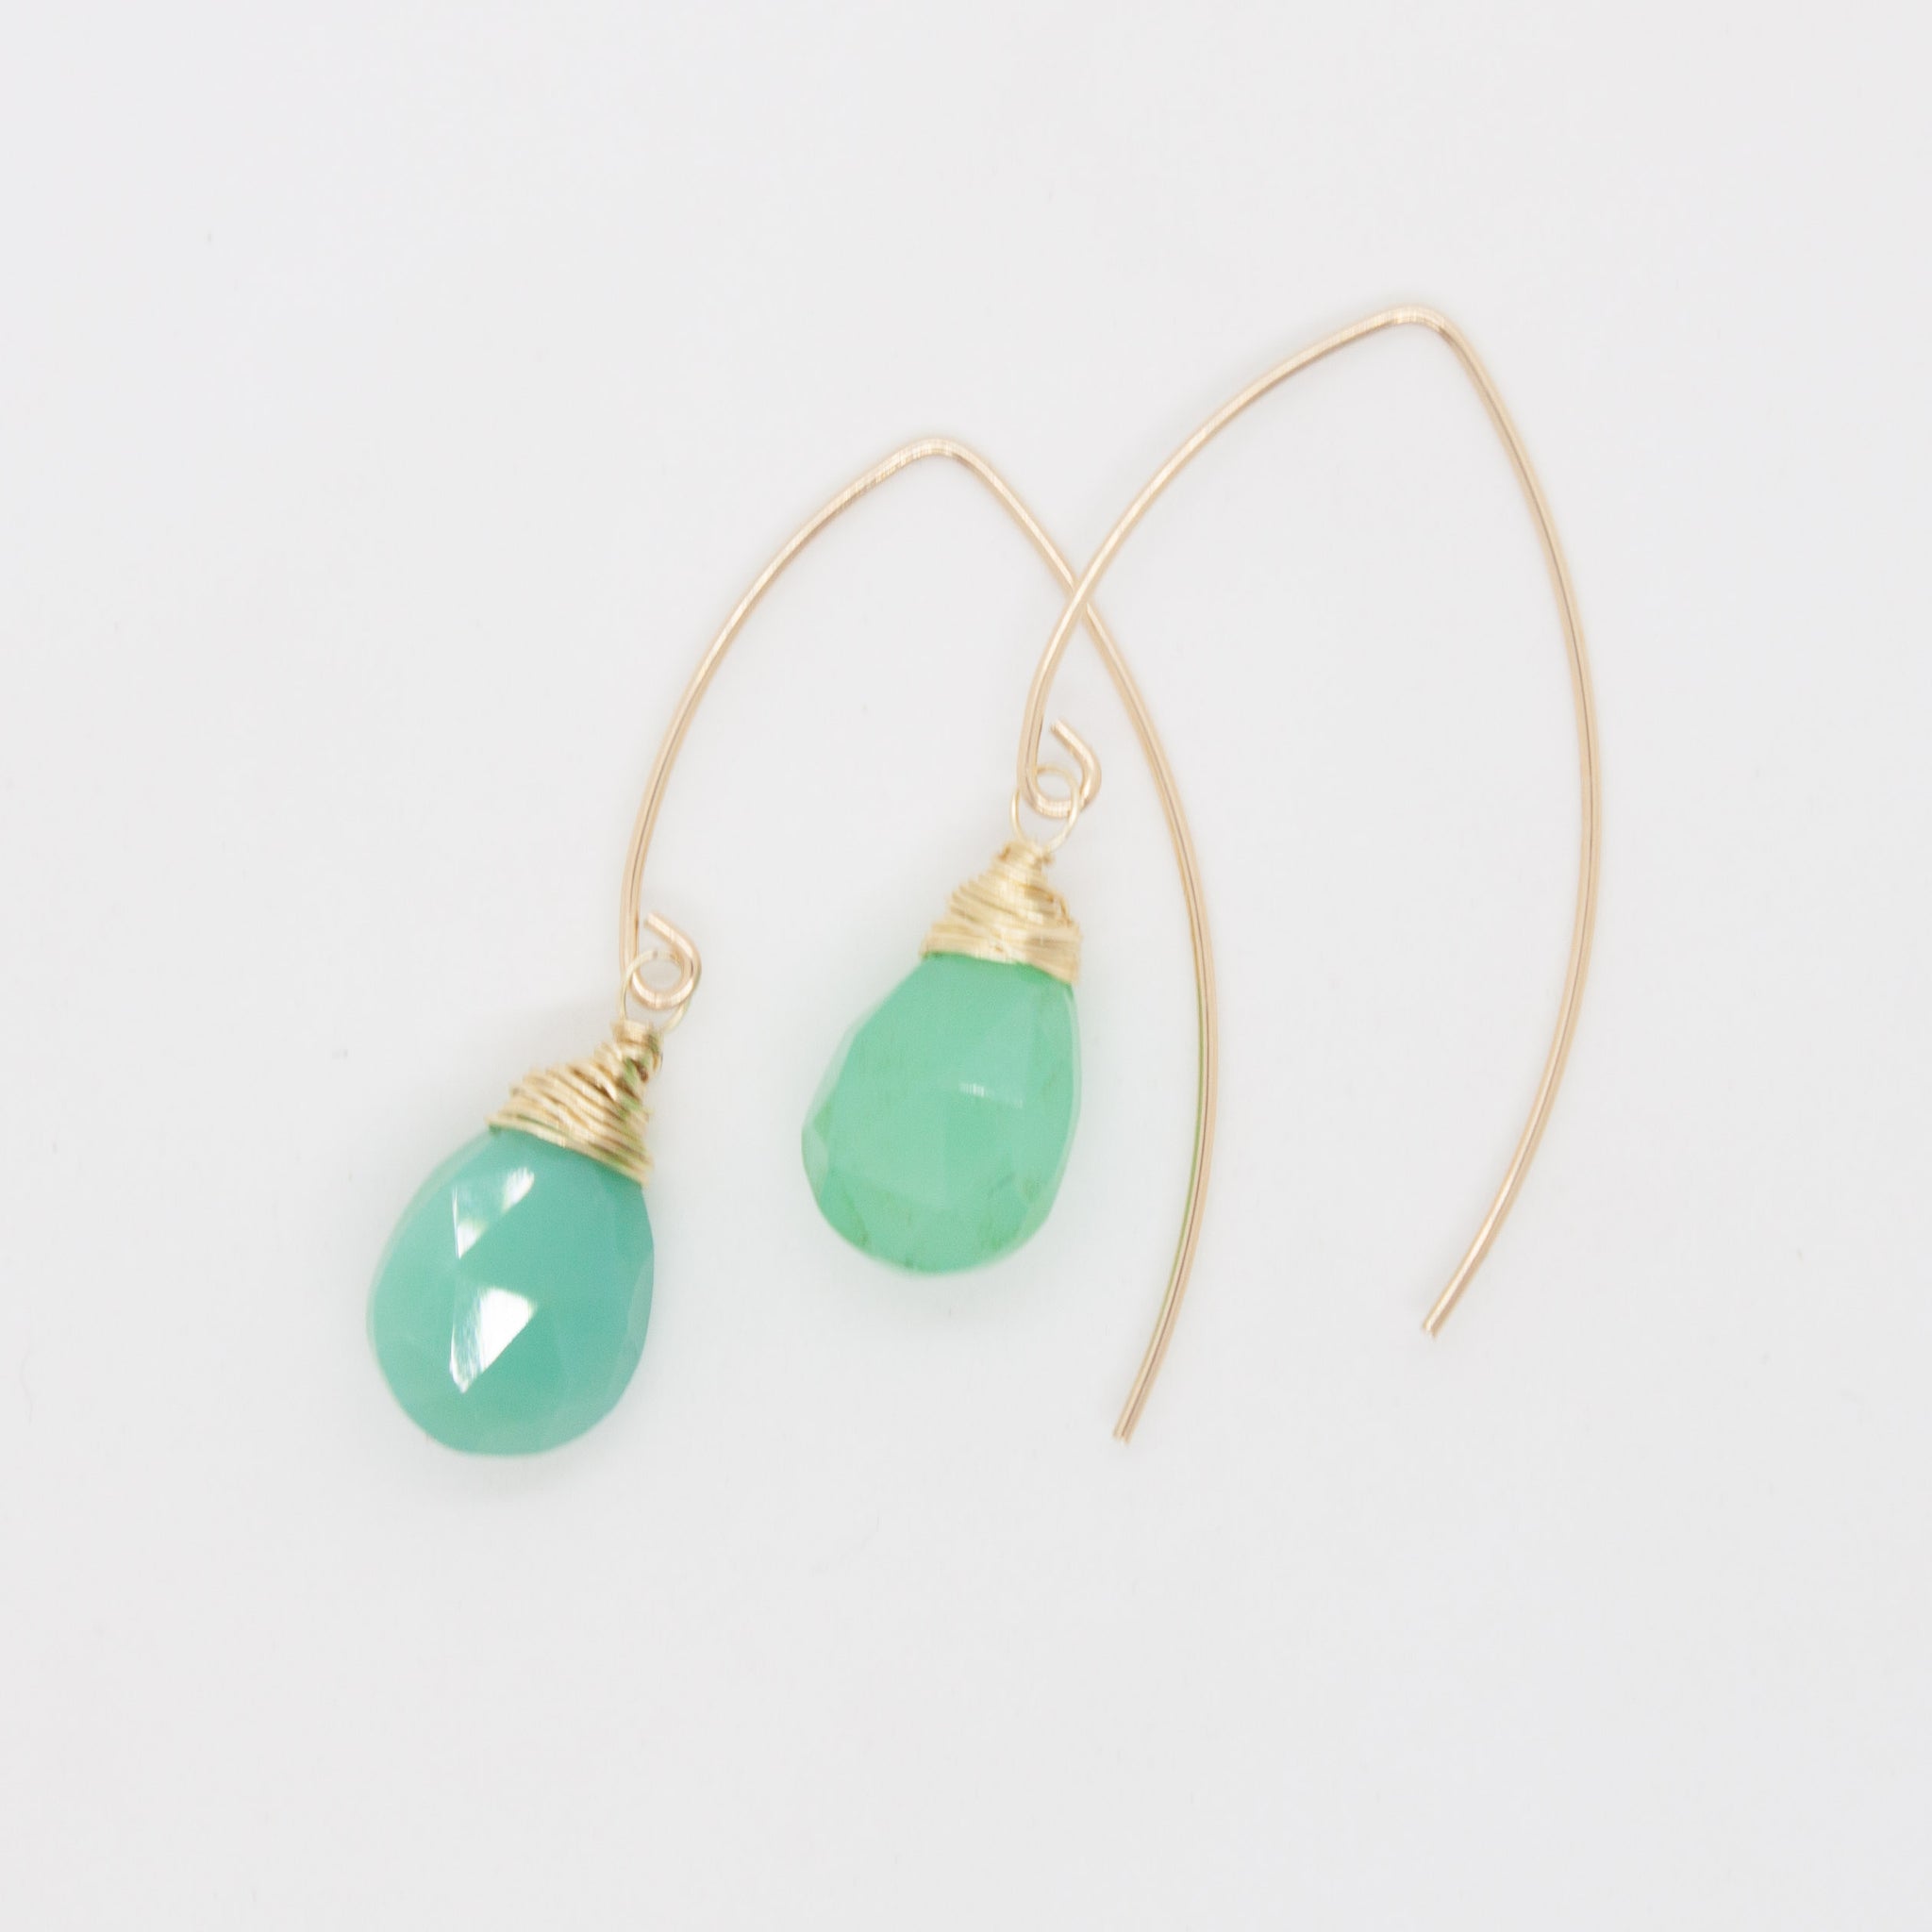 Bring joy, hope and happiness to your pretty lobes this summer with these delicate chrysoprase drops wrapped in gold. 1 inch earrings made with faceted, pear-shaped chrysoprase briolettes, wrapped in 14 karat gold wire on gold-filled earring hooks. Hypo-allergenic and sensitive ear friendly. Handmade in Toronto by kp jewelry co.